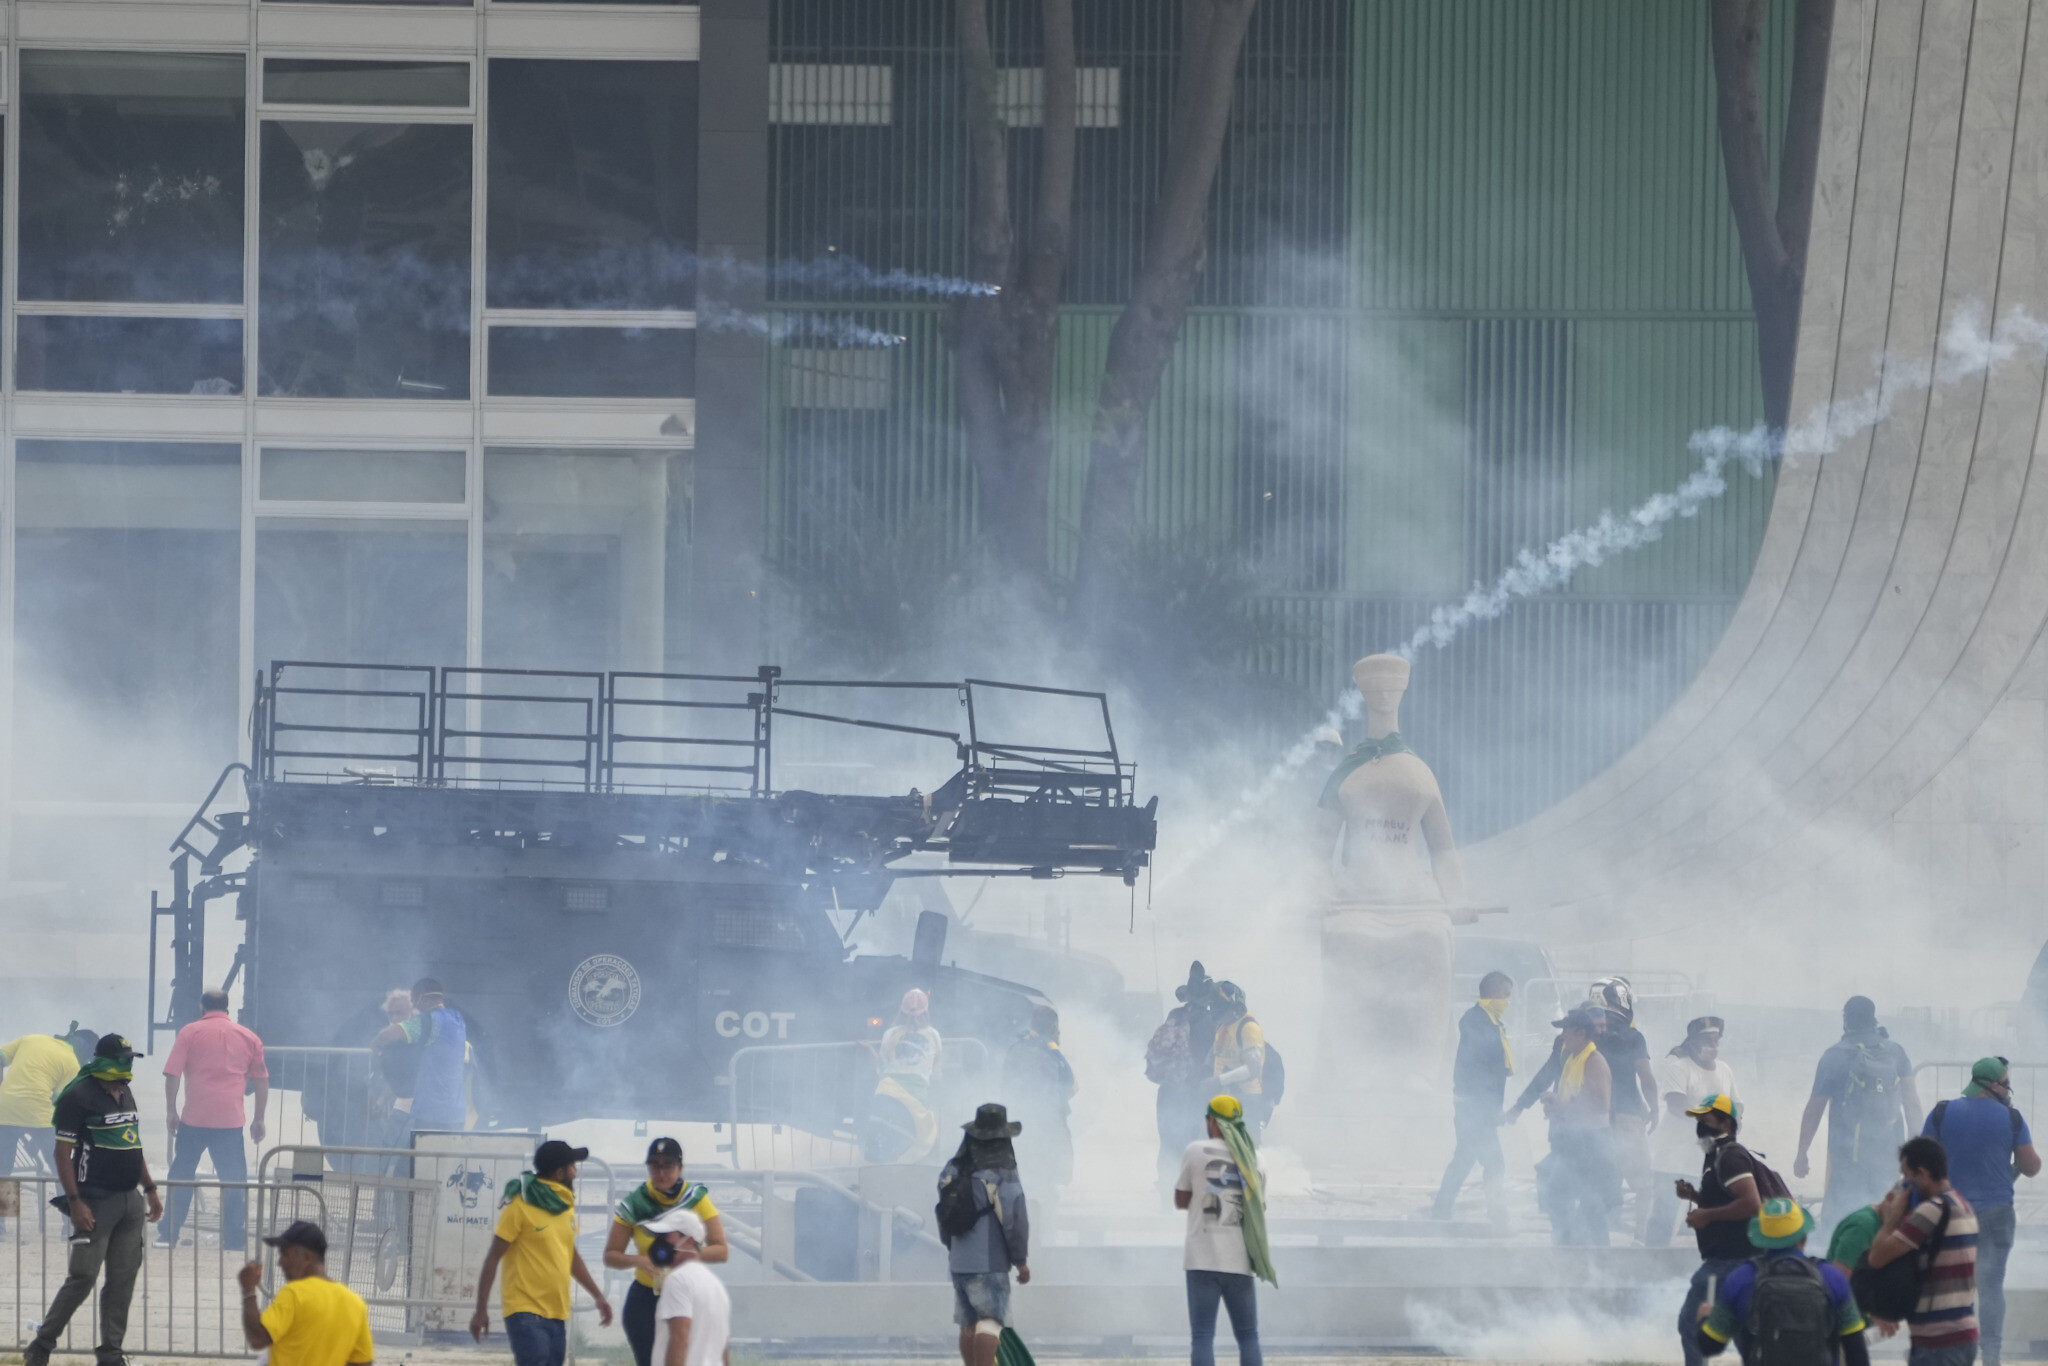 Photos of Bolsonaro supporters storming congress in Brazil - The